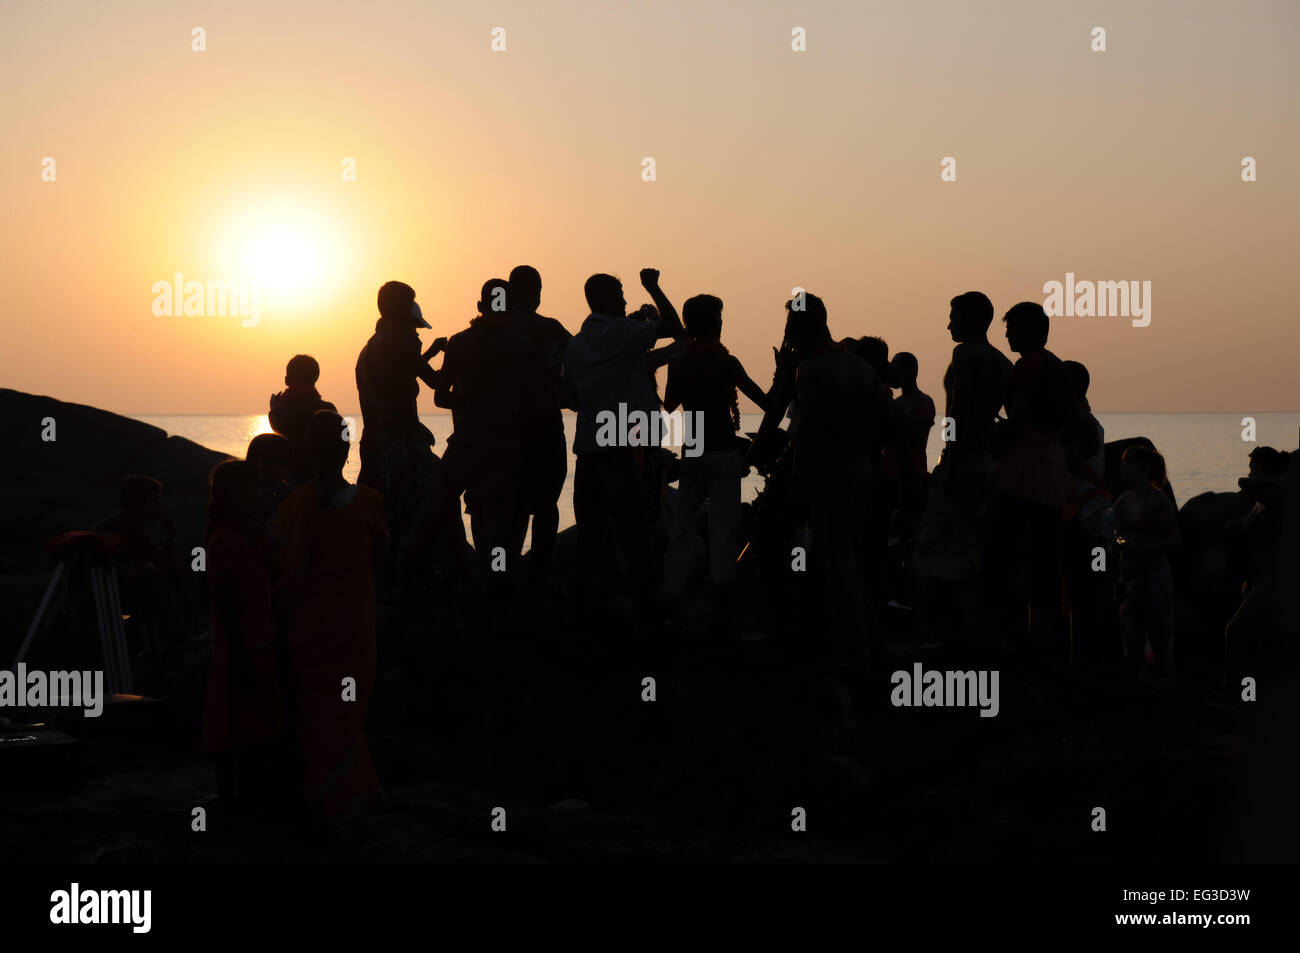 Silhouette of group of people dancing at sunset near the sea Stock Photo